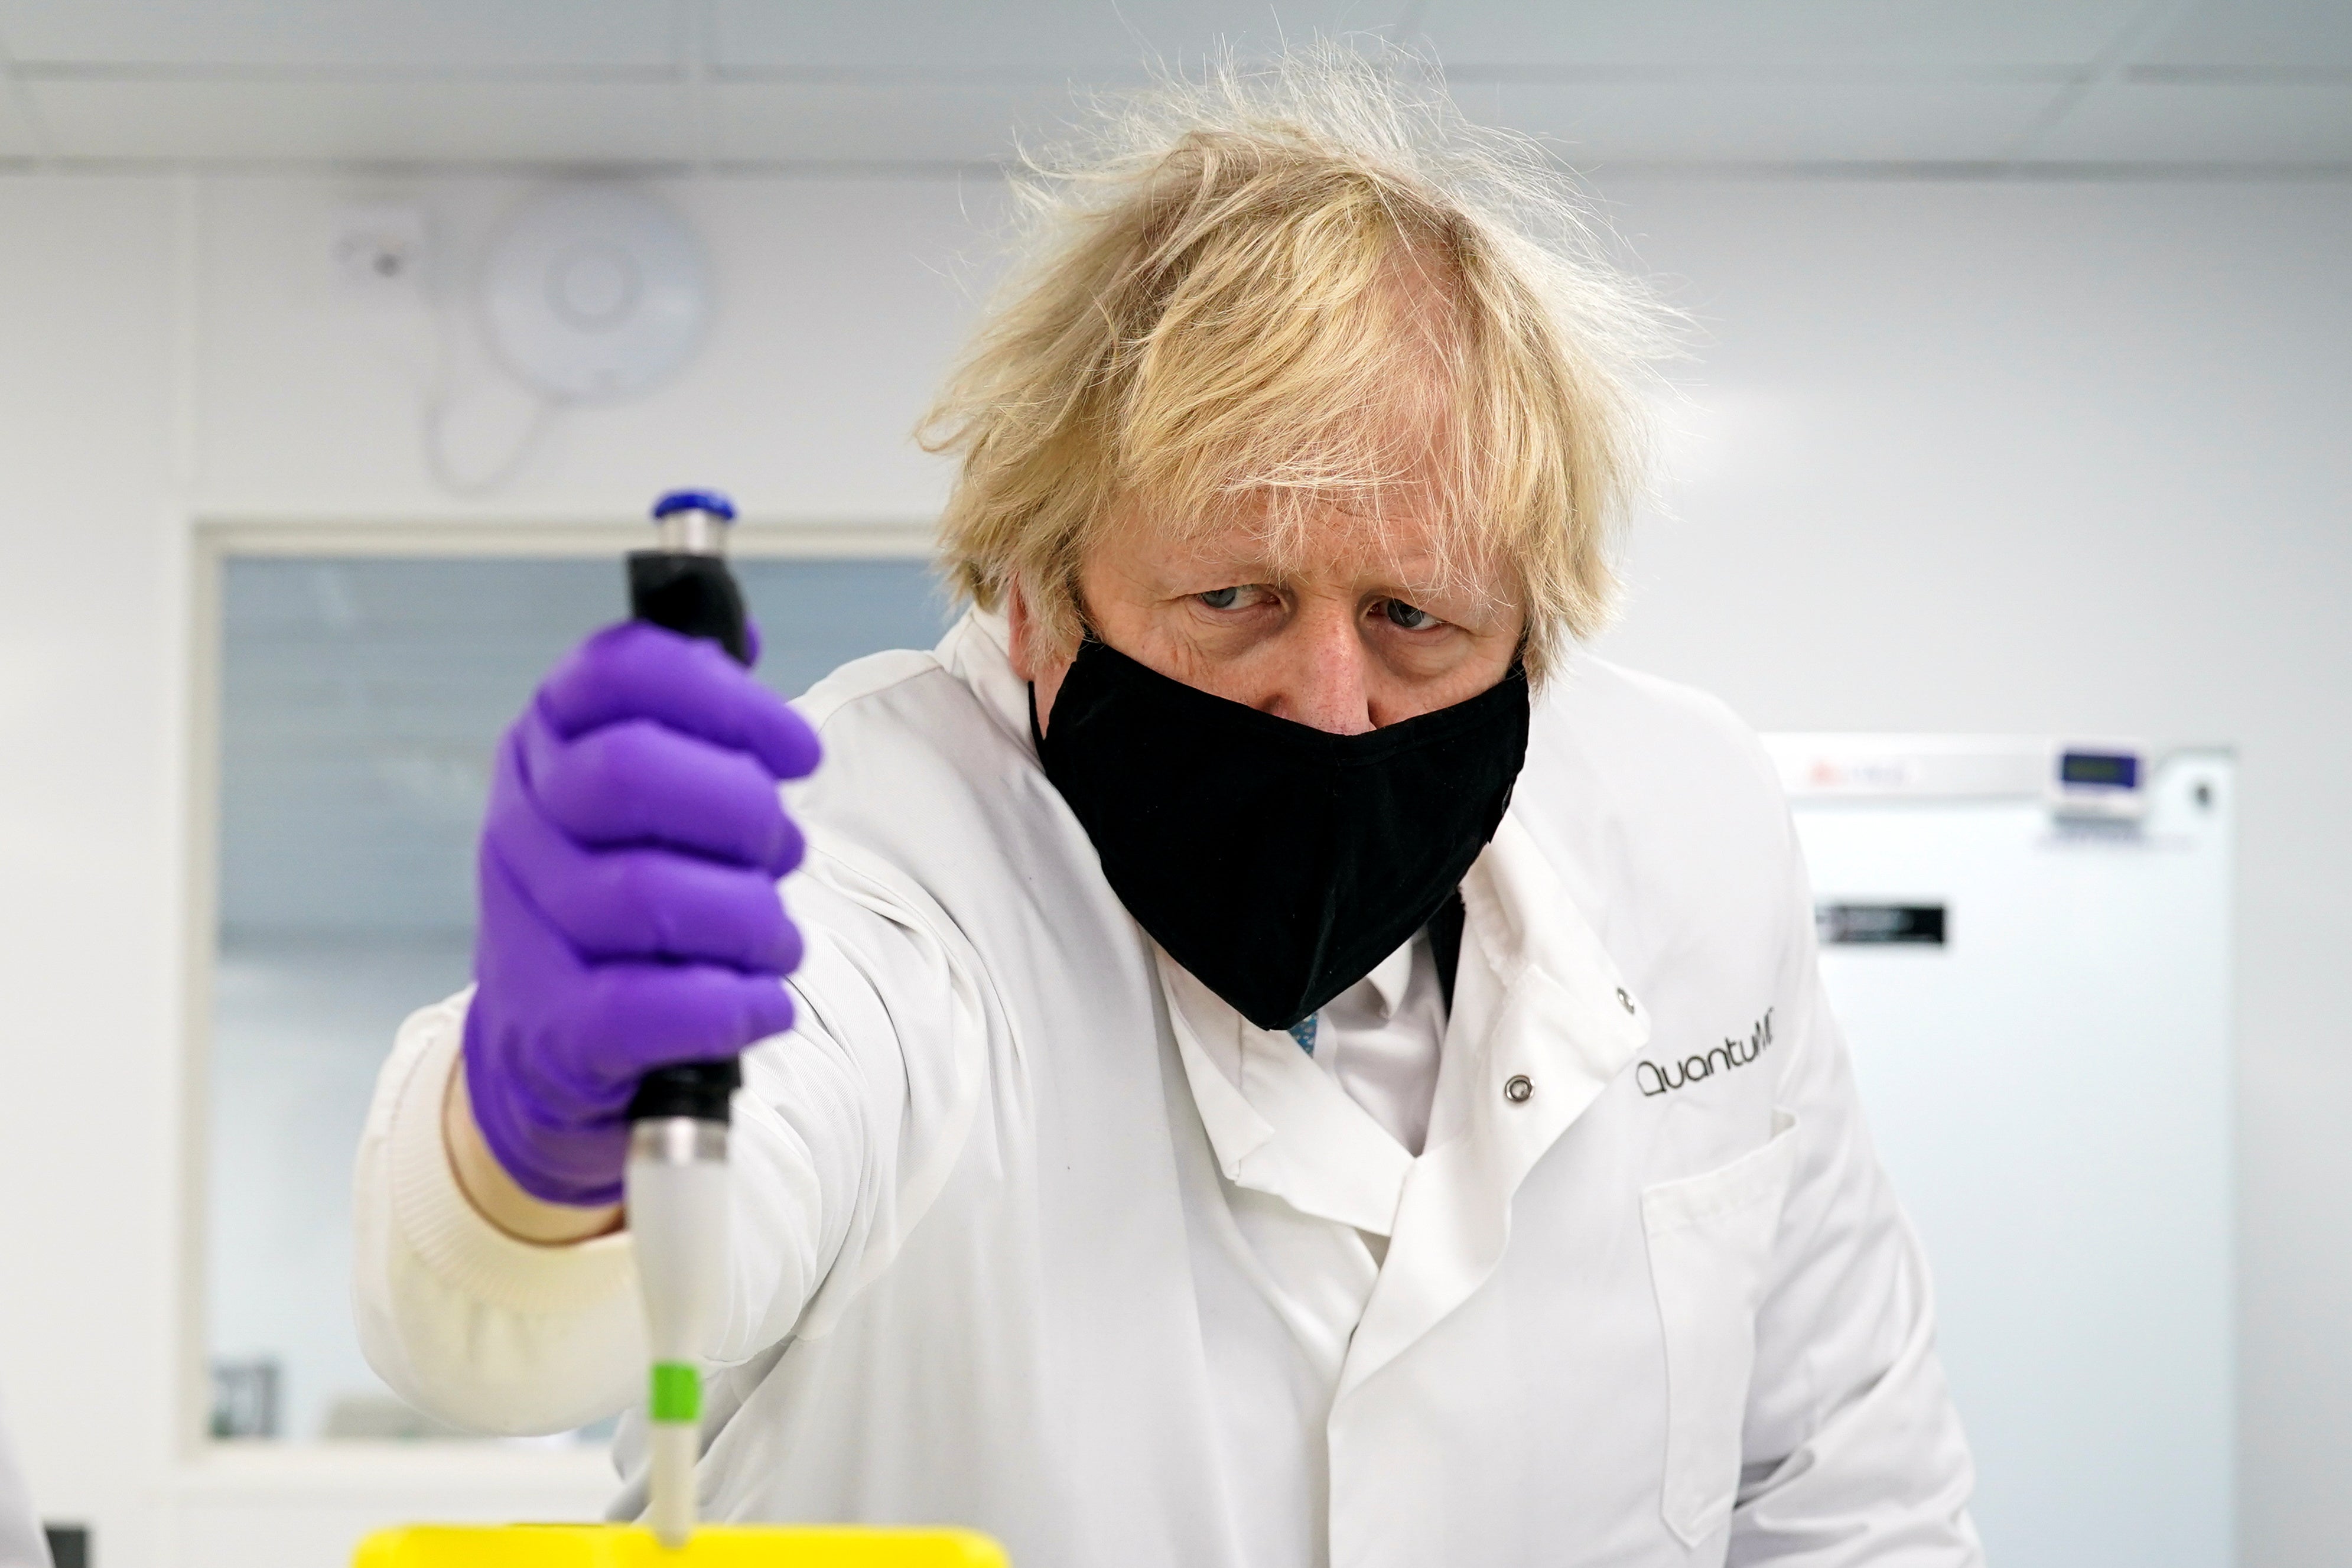 The PM needs to ‘follow the science’